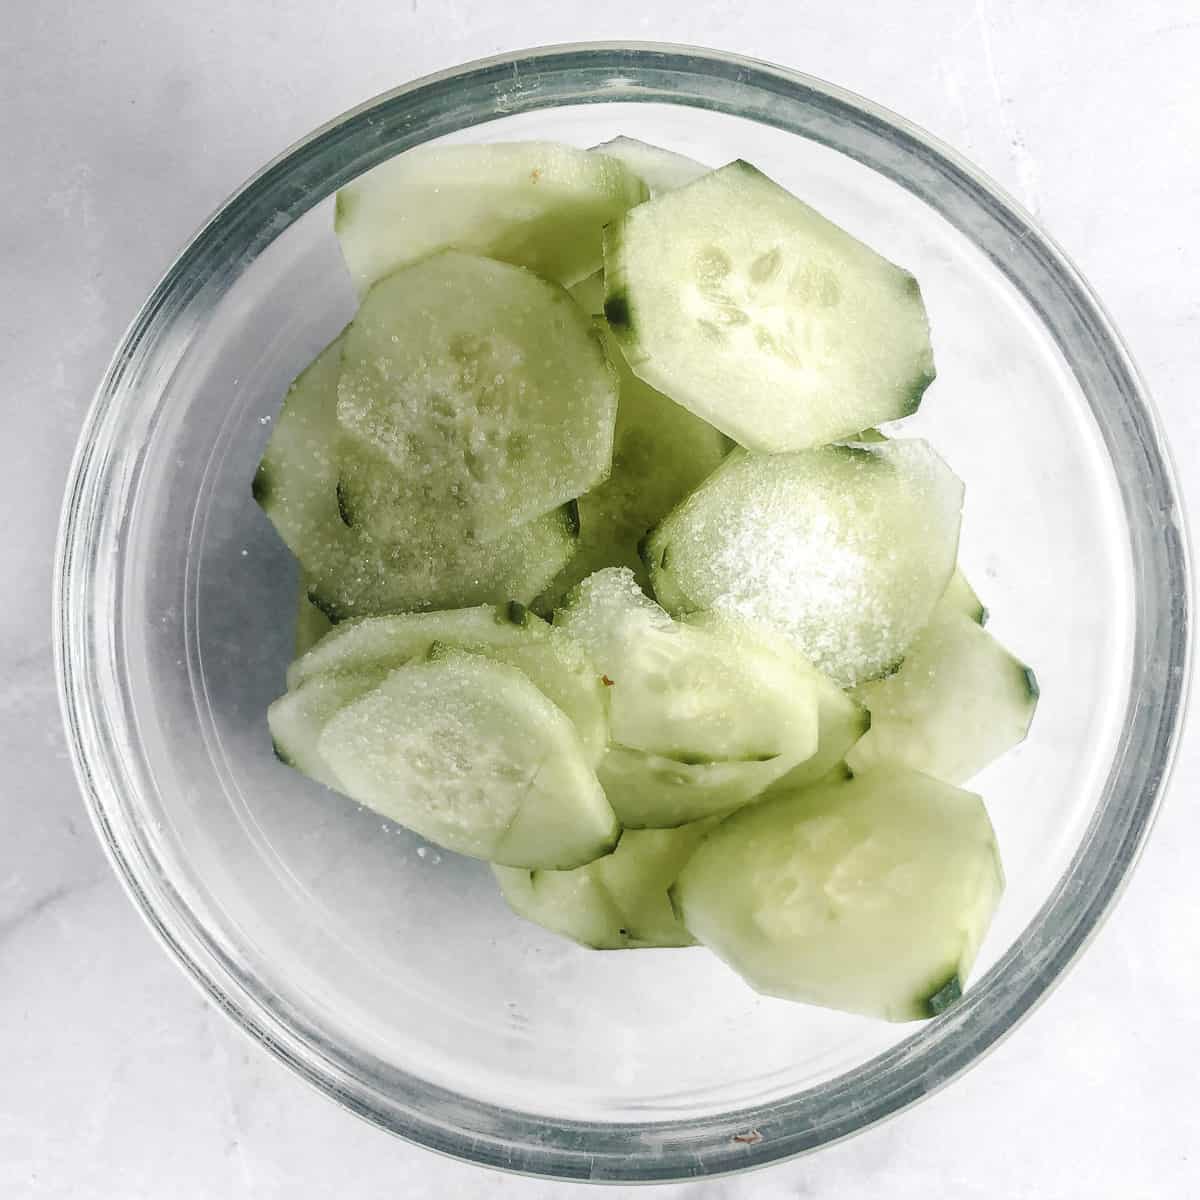 Bowl of thinly sliced cucumbers sprinkled with salt.